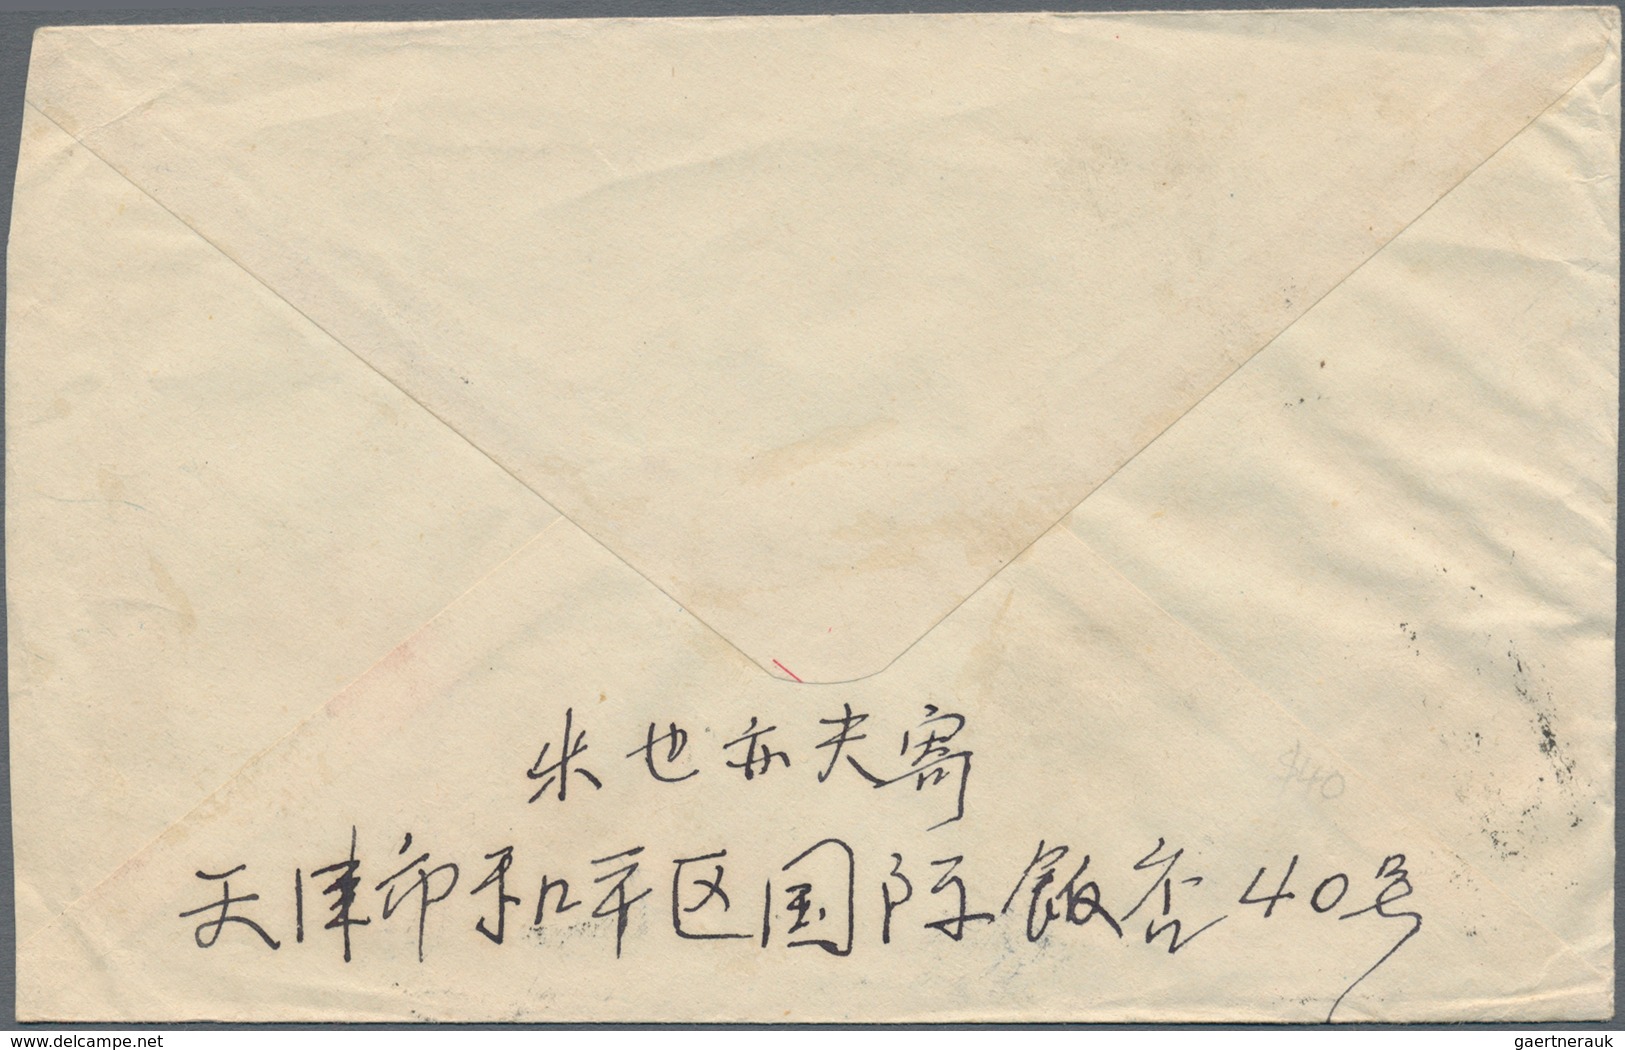 China - Volksrepublik: 1953/60, illustrated covers used to Hong Kong (18, mostly surface) or to Russ